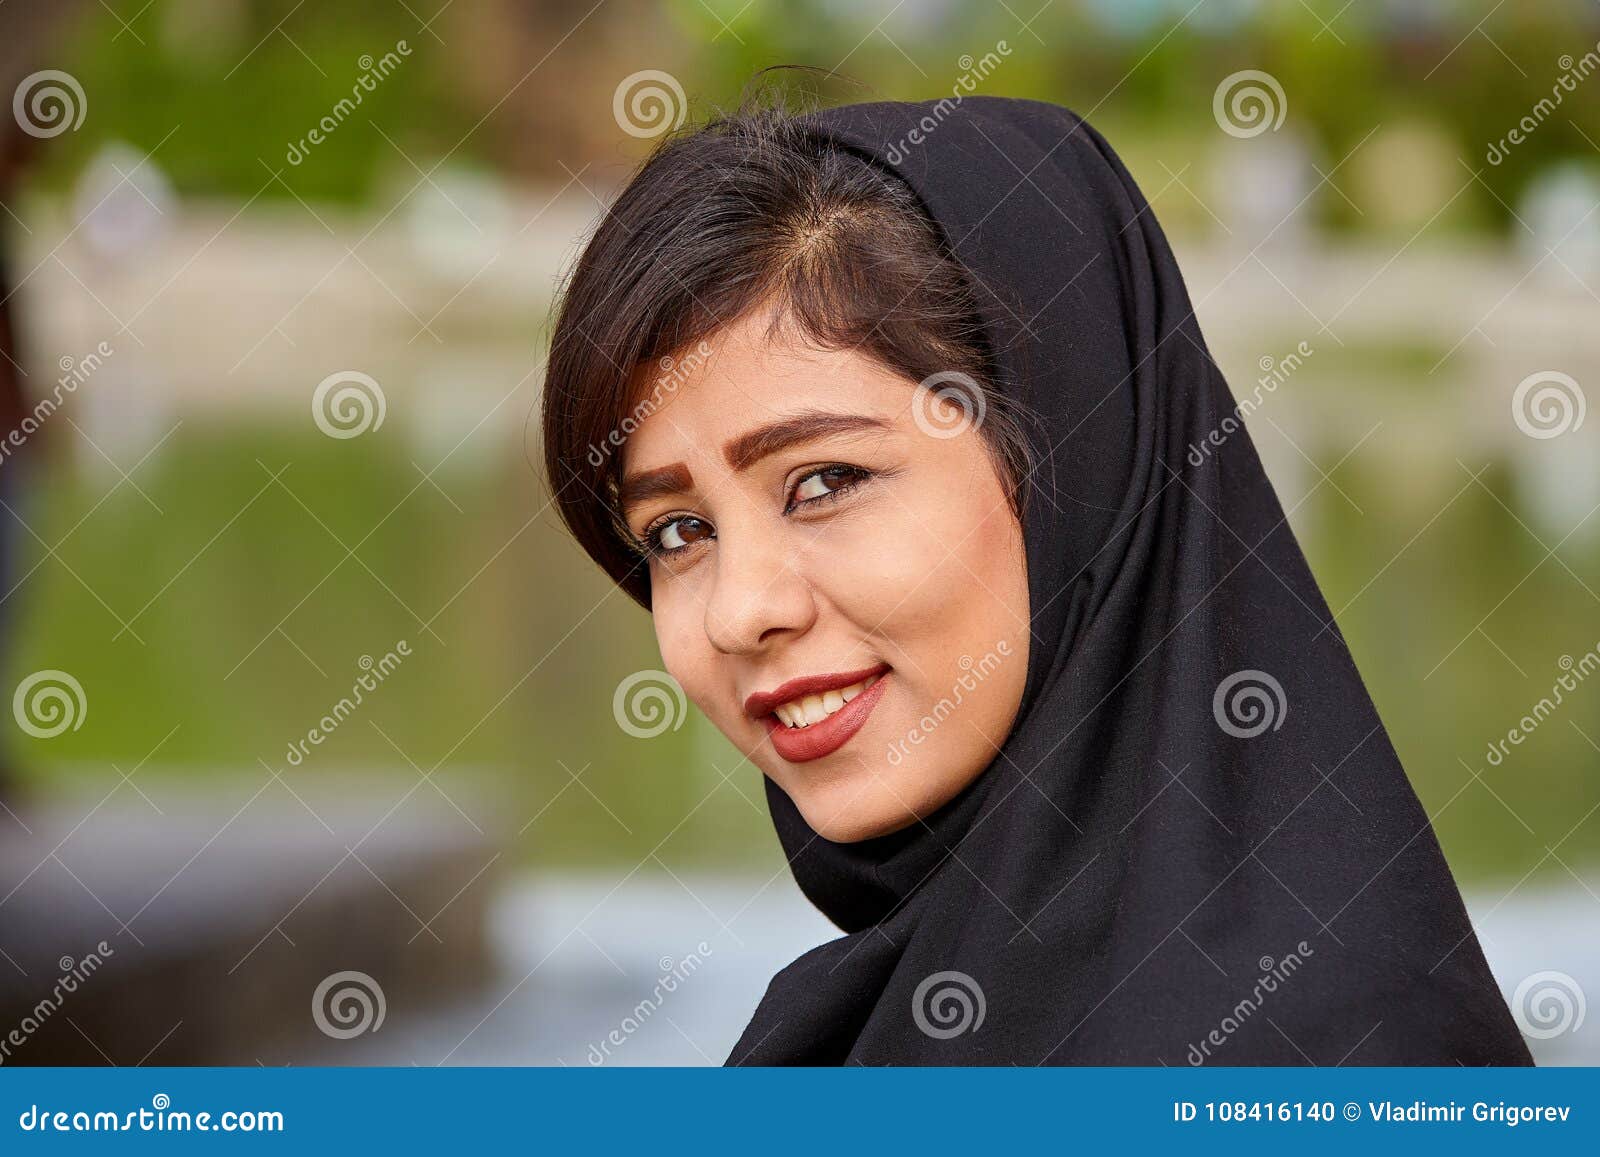 Iranian girls pictures